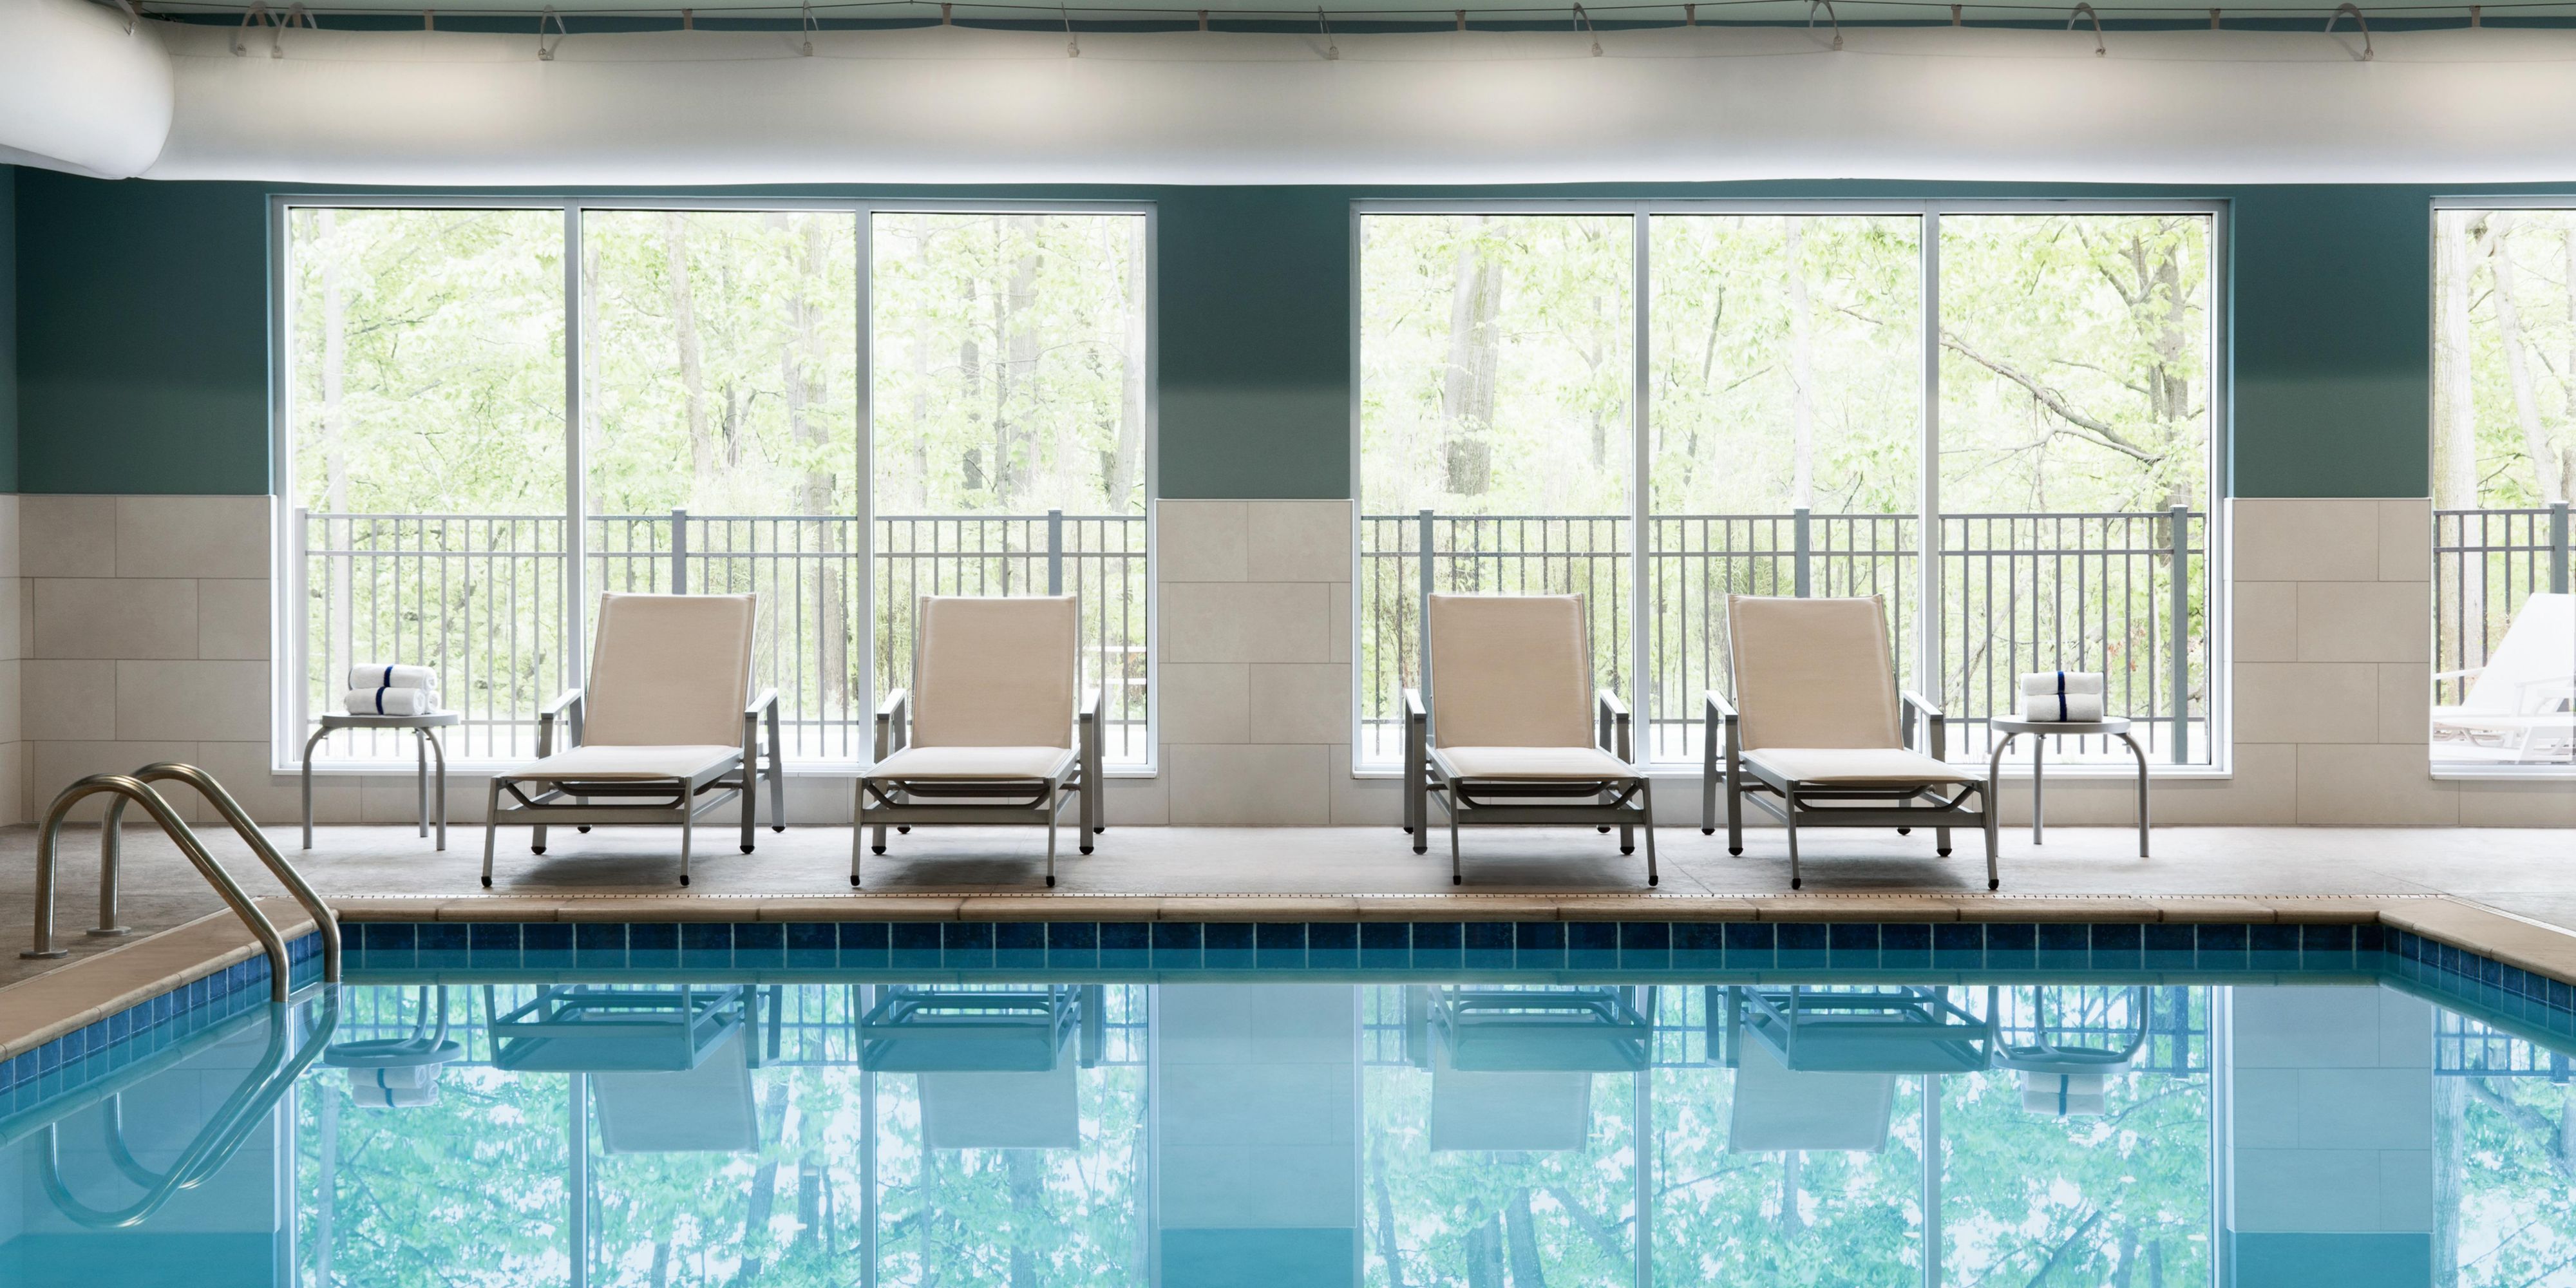 Enjoy our Indoor Heated Pool (open from 8:00am-10:00pm) or our 24 Hour State-of-Art Fitness Center